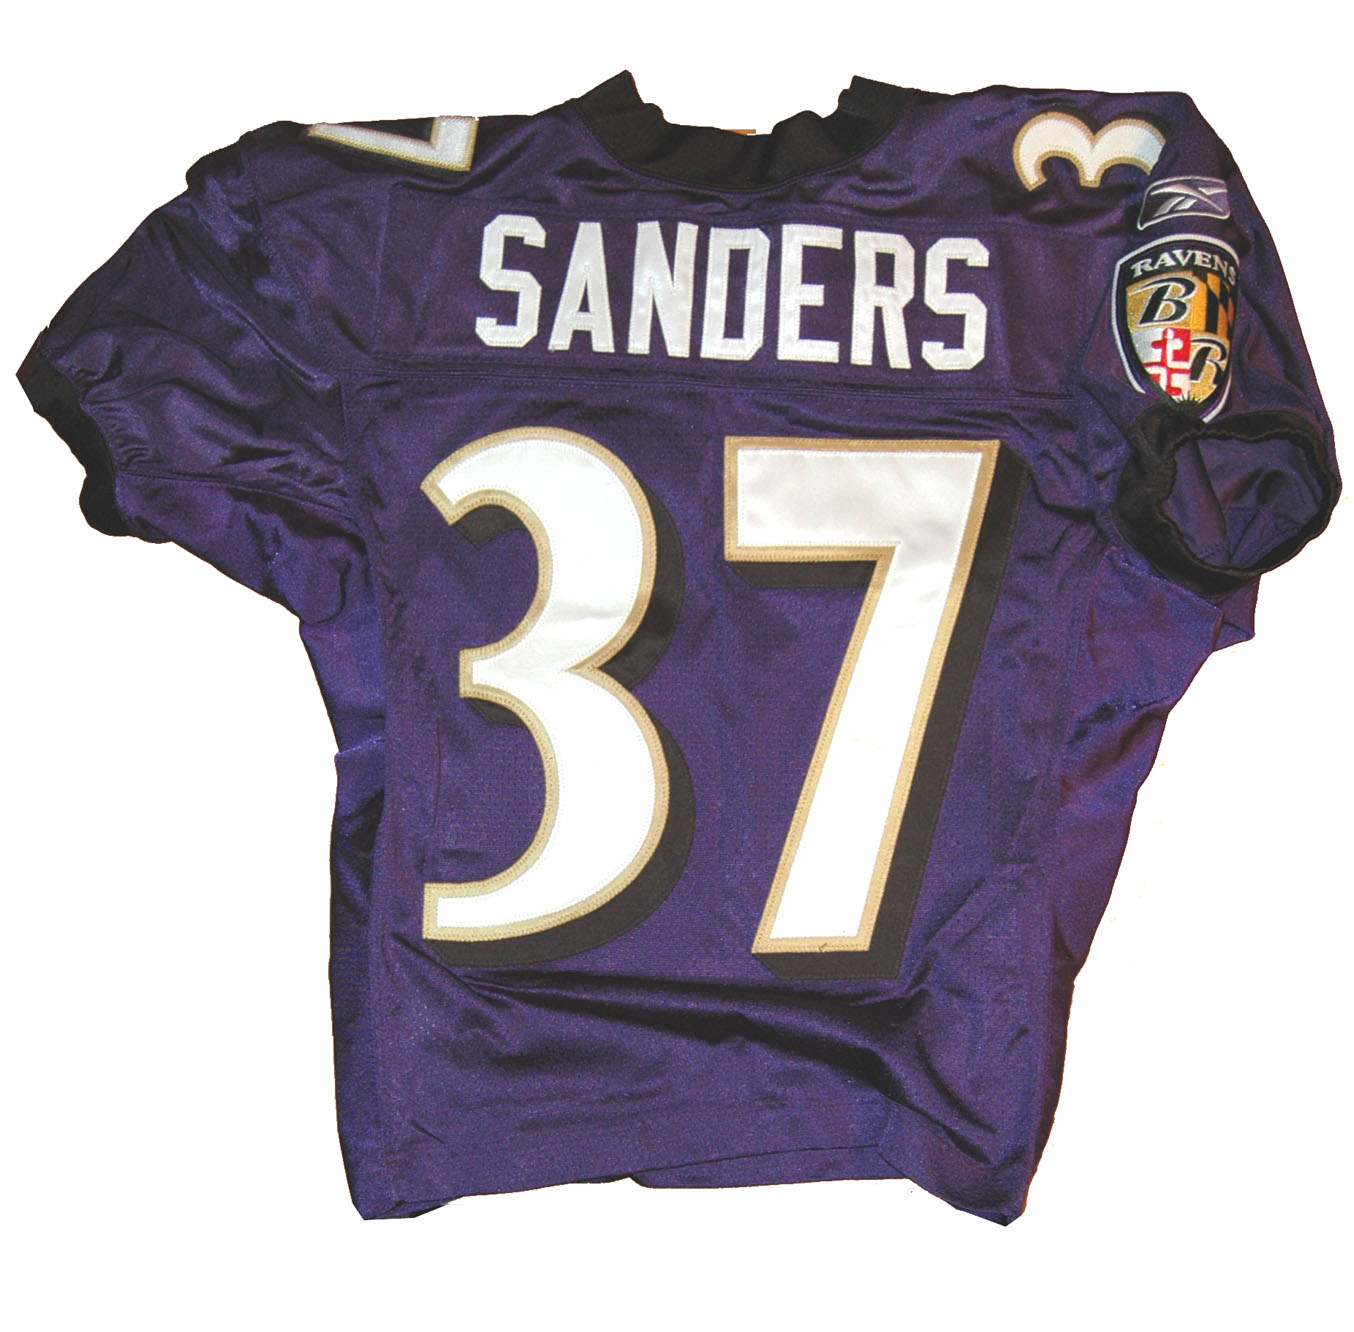 Sell Your Deion Sanders Game Worn Jersey at Nate D. Sanders Auctions